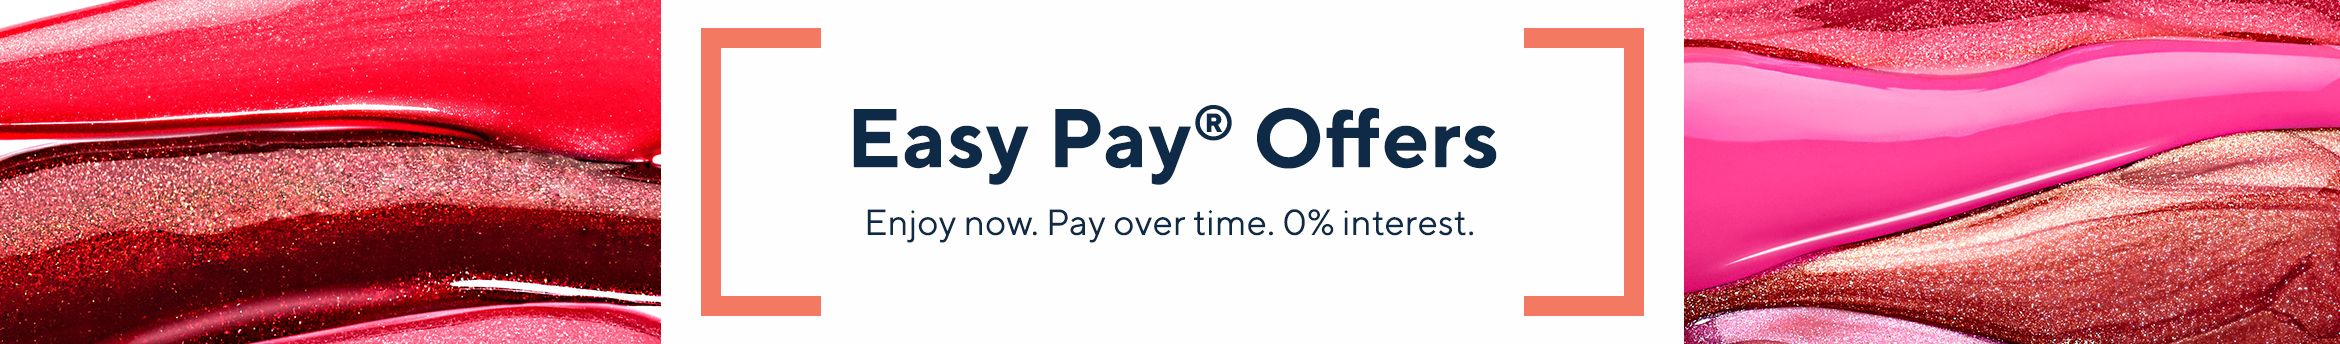 Easy Pay® Offers - Enjoy now. Pay over time. 0% interest. 